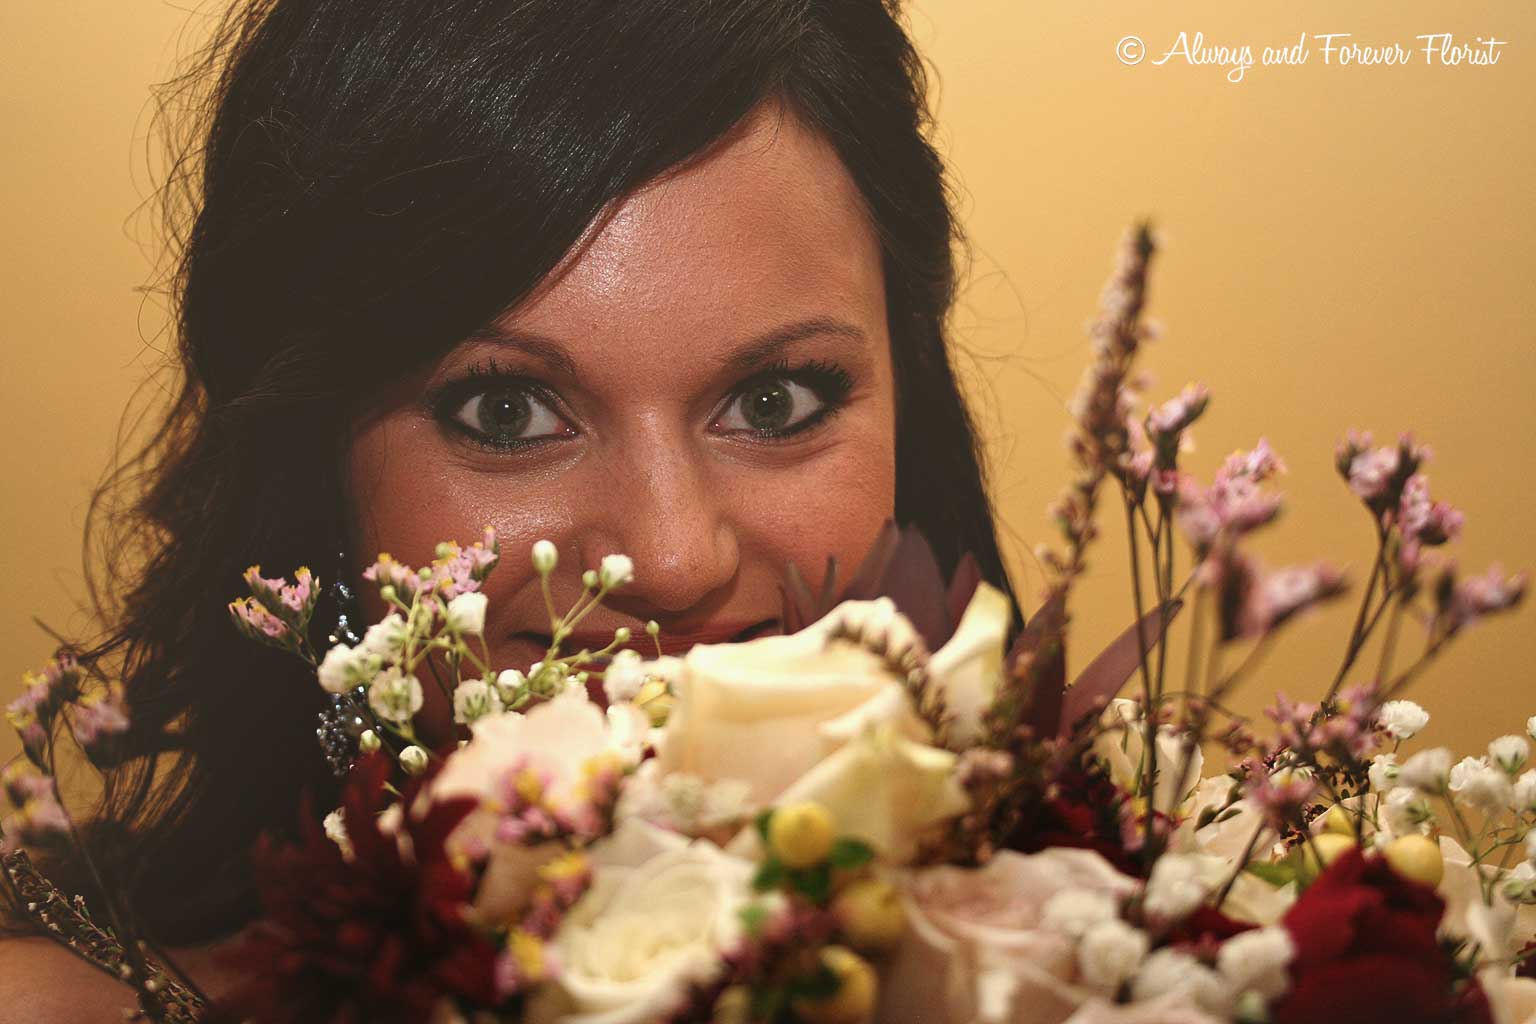 The Eyes Show This Brides Happiness